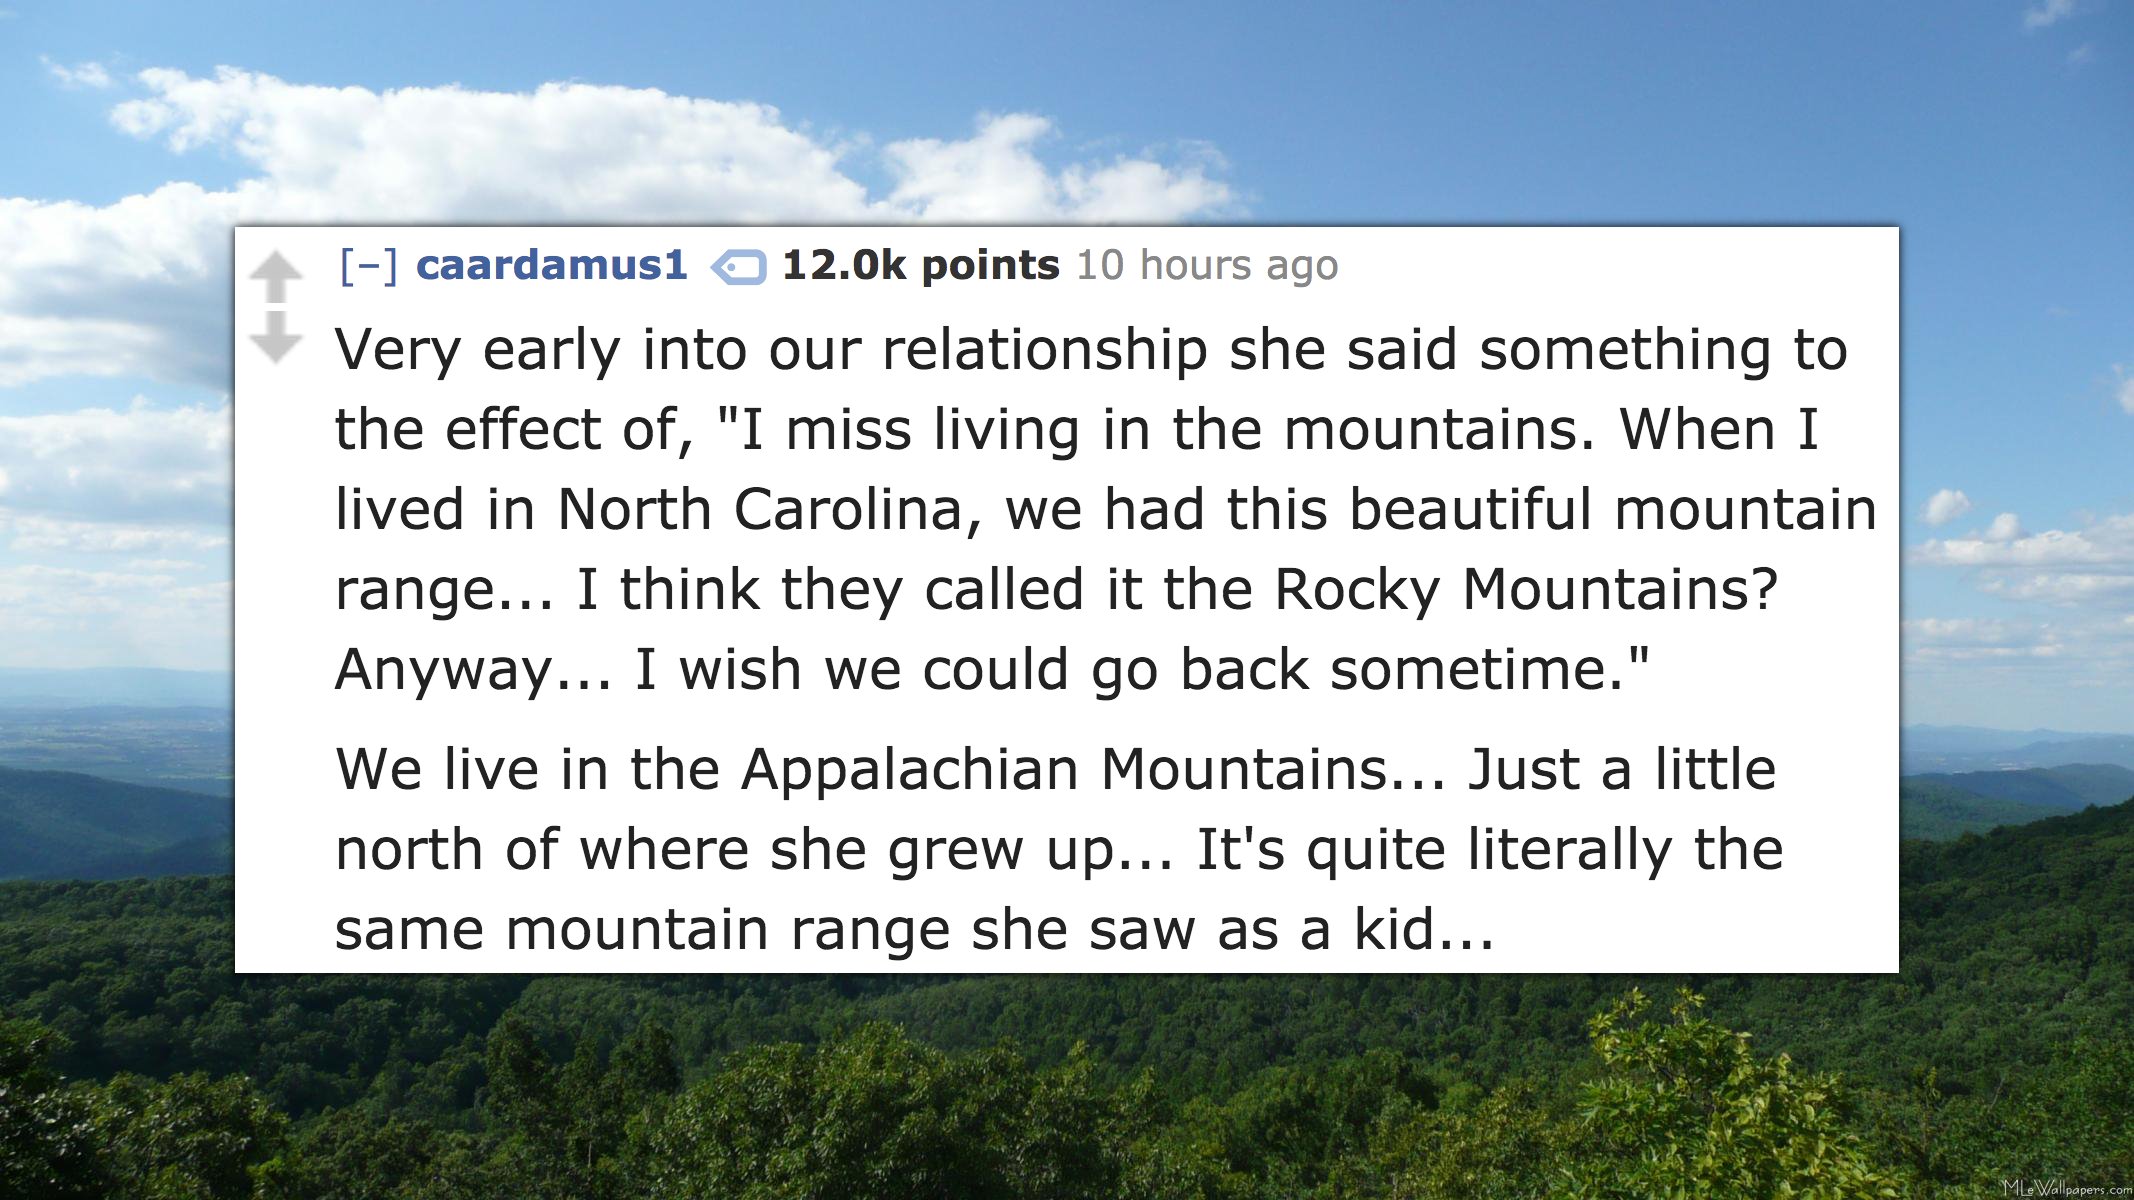 appalachian mountains - caardamus1 points 10 hours ago Very early into our relationship she said something to the effect of, "I miss living in the mountains. When I lived in North Carolina, we had this beautiful mountain range... I think they called it th